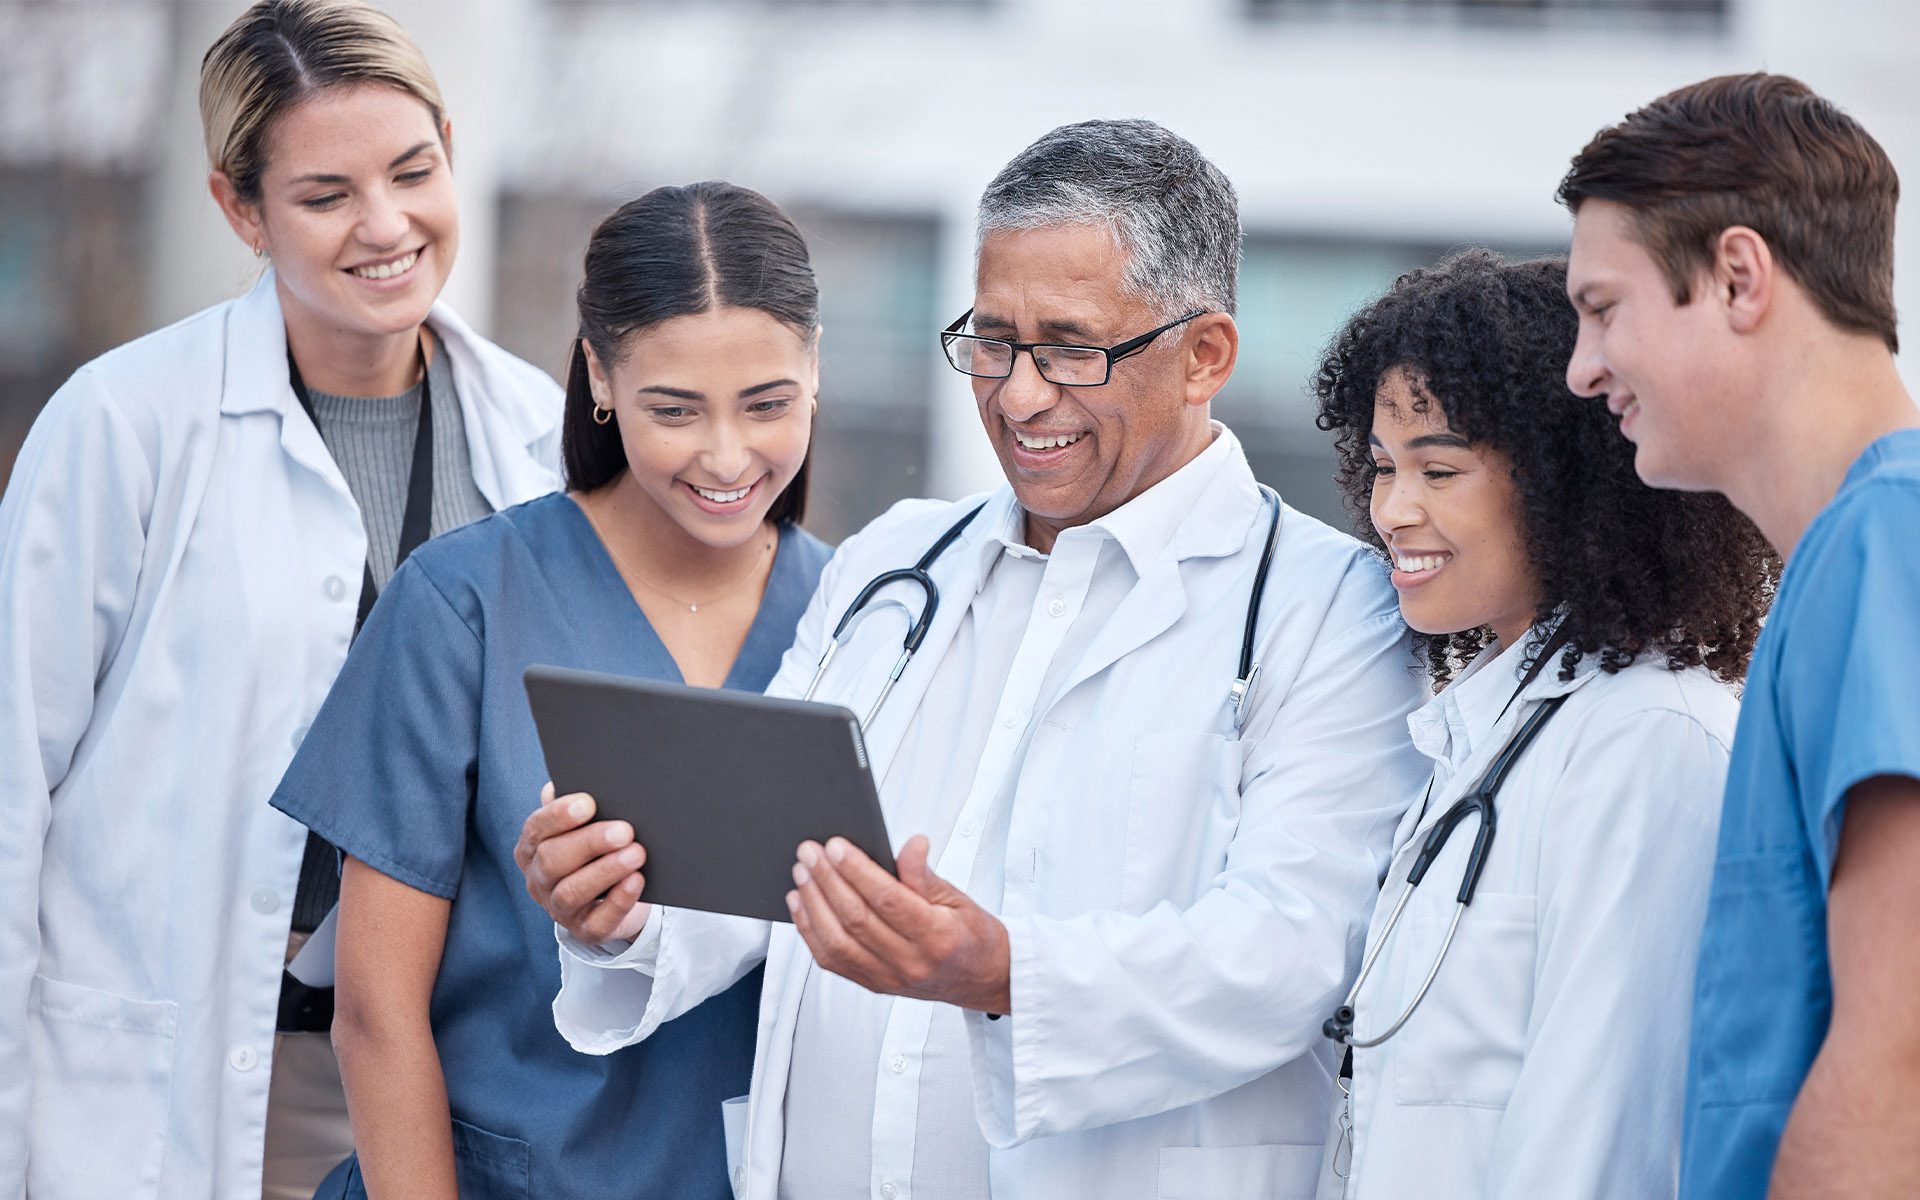 Unity Insurance | A MedChi Company - Group of Doctors Looking Over a Tablet Together